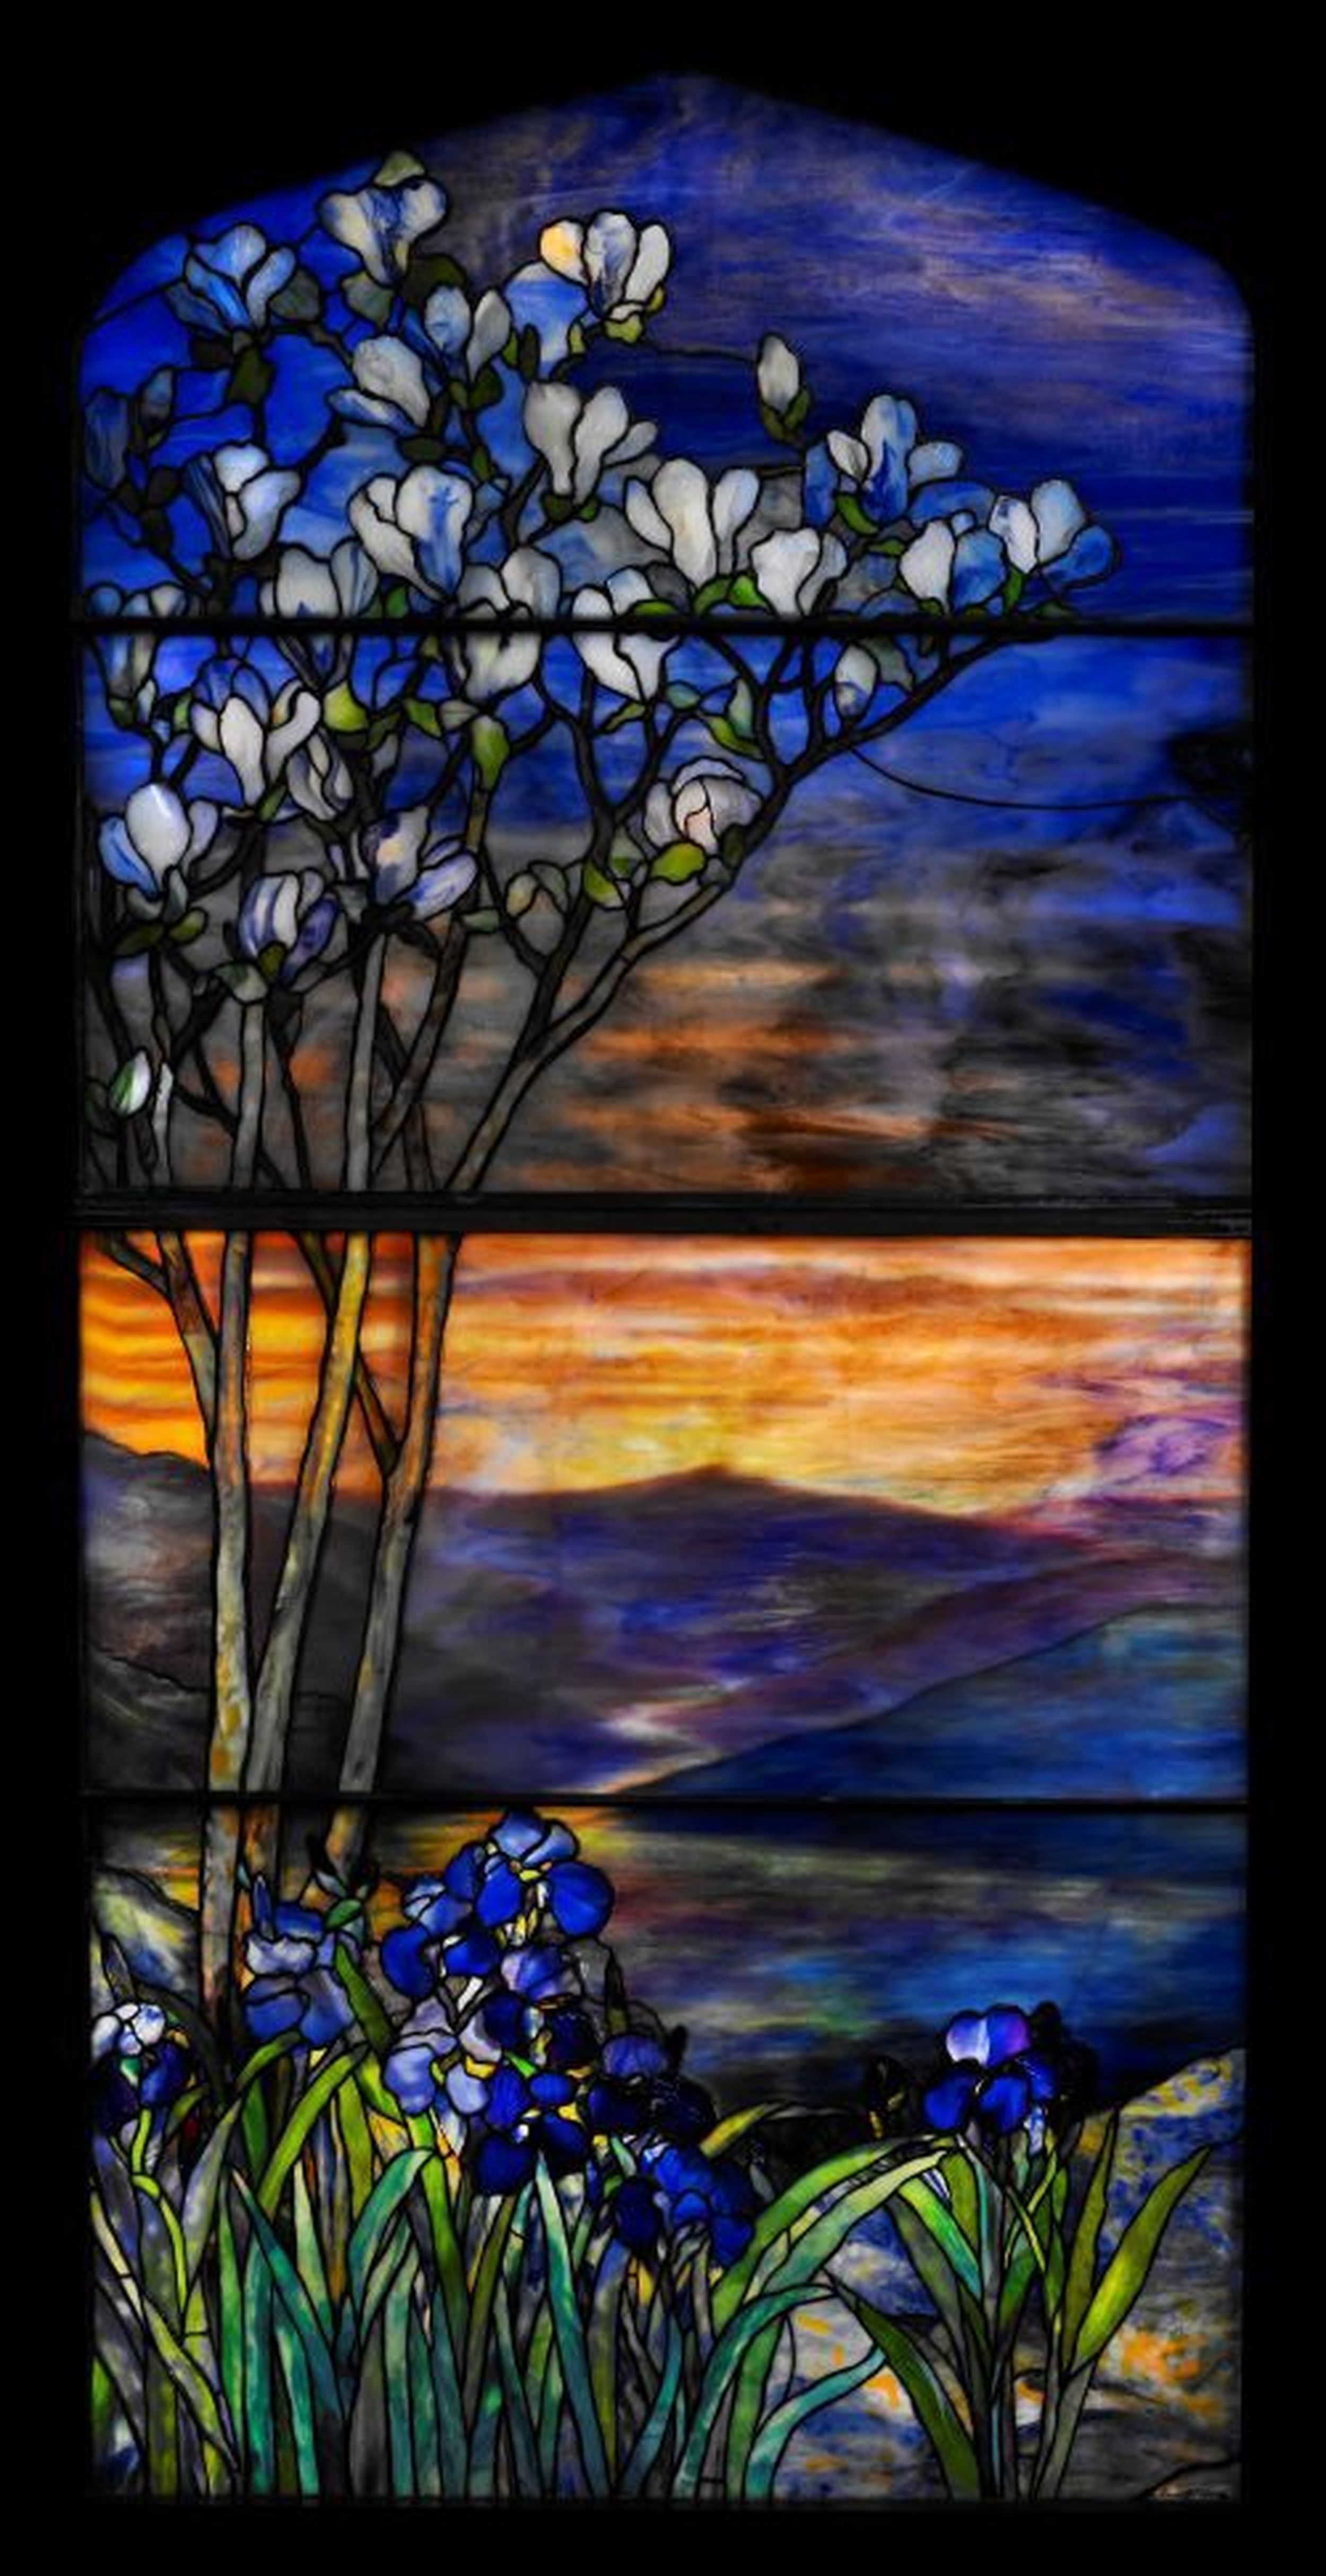 Tiffany glass on exhibit transcends its time